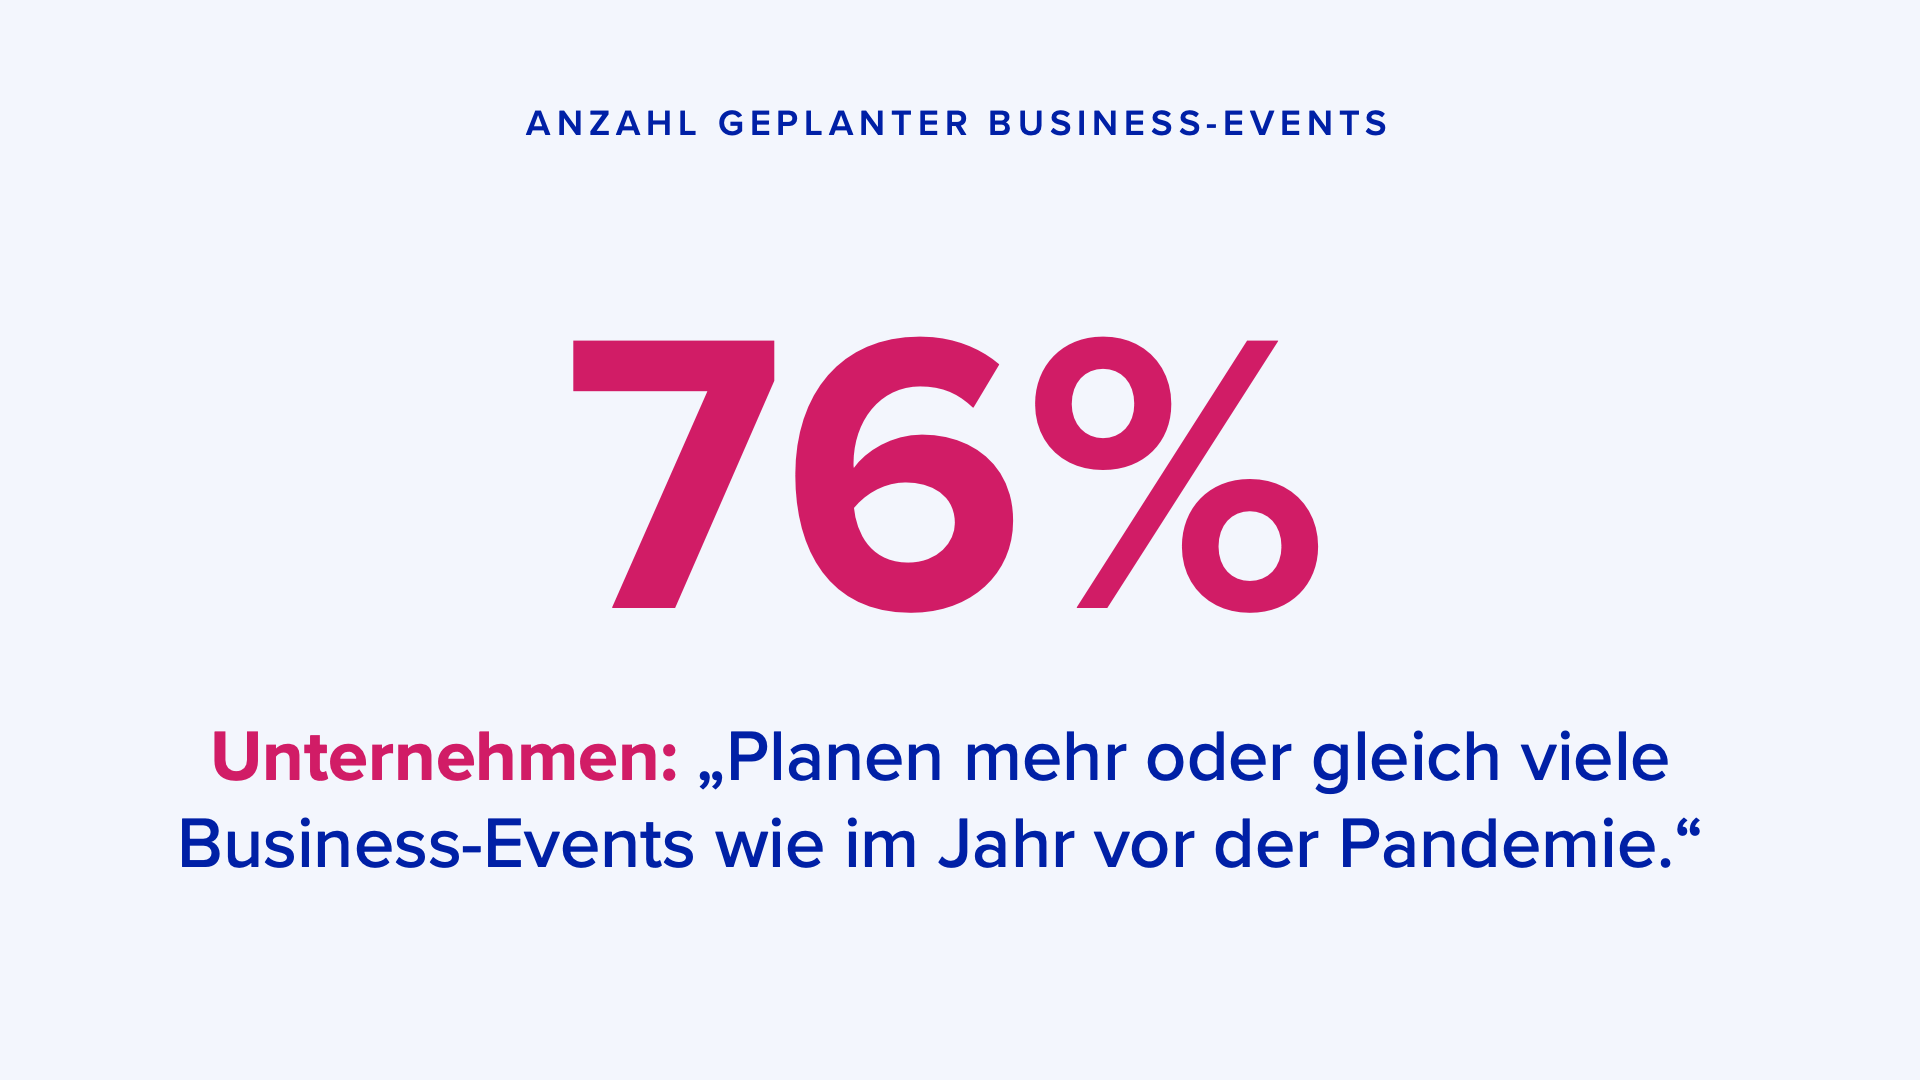 Mehr Business-Events in Planung Invitario-Studie 2022